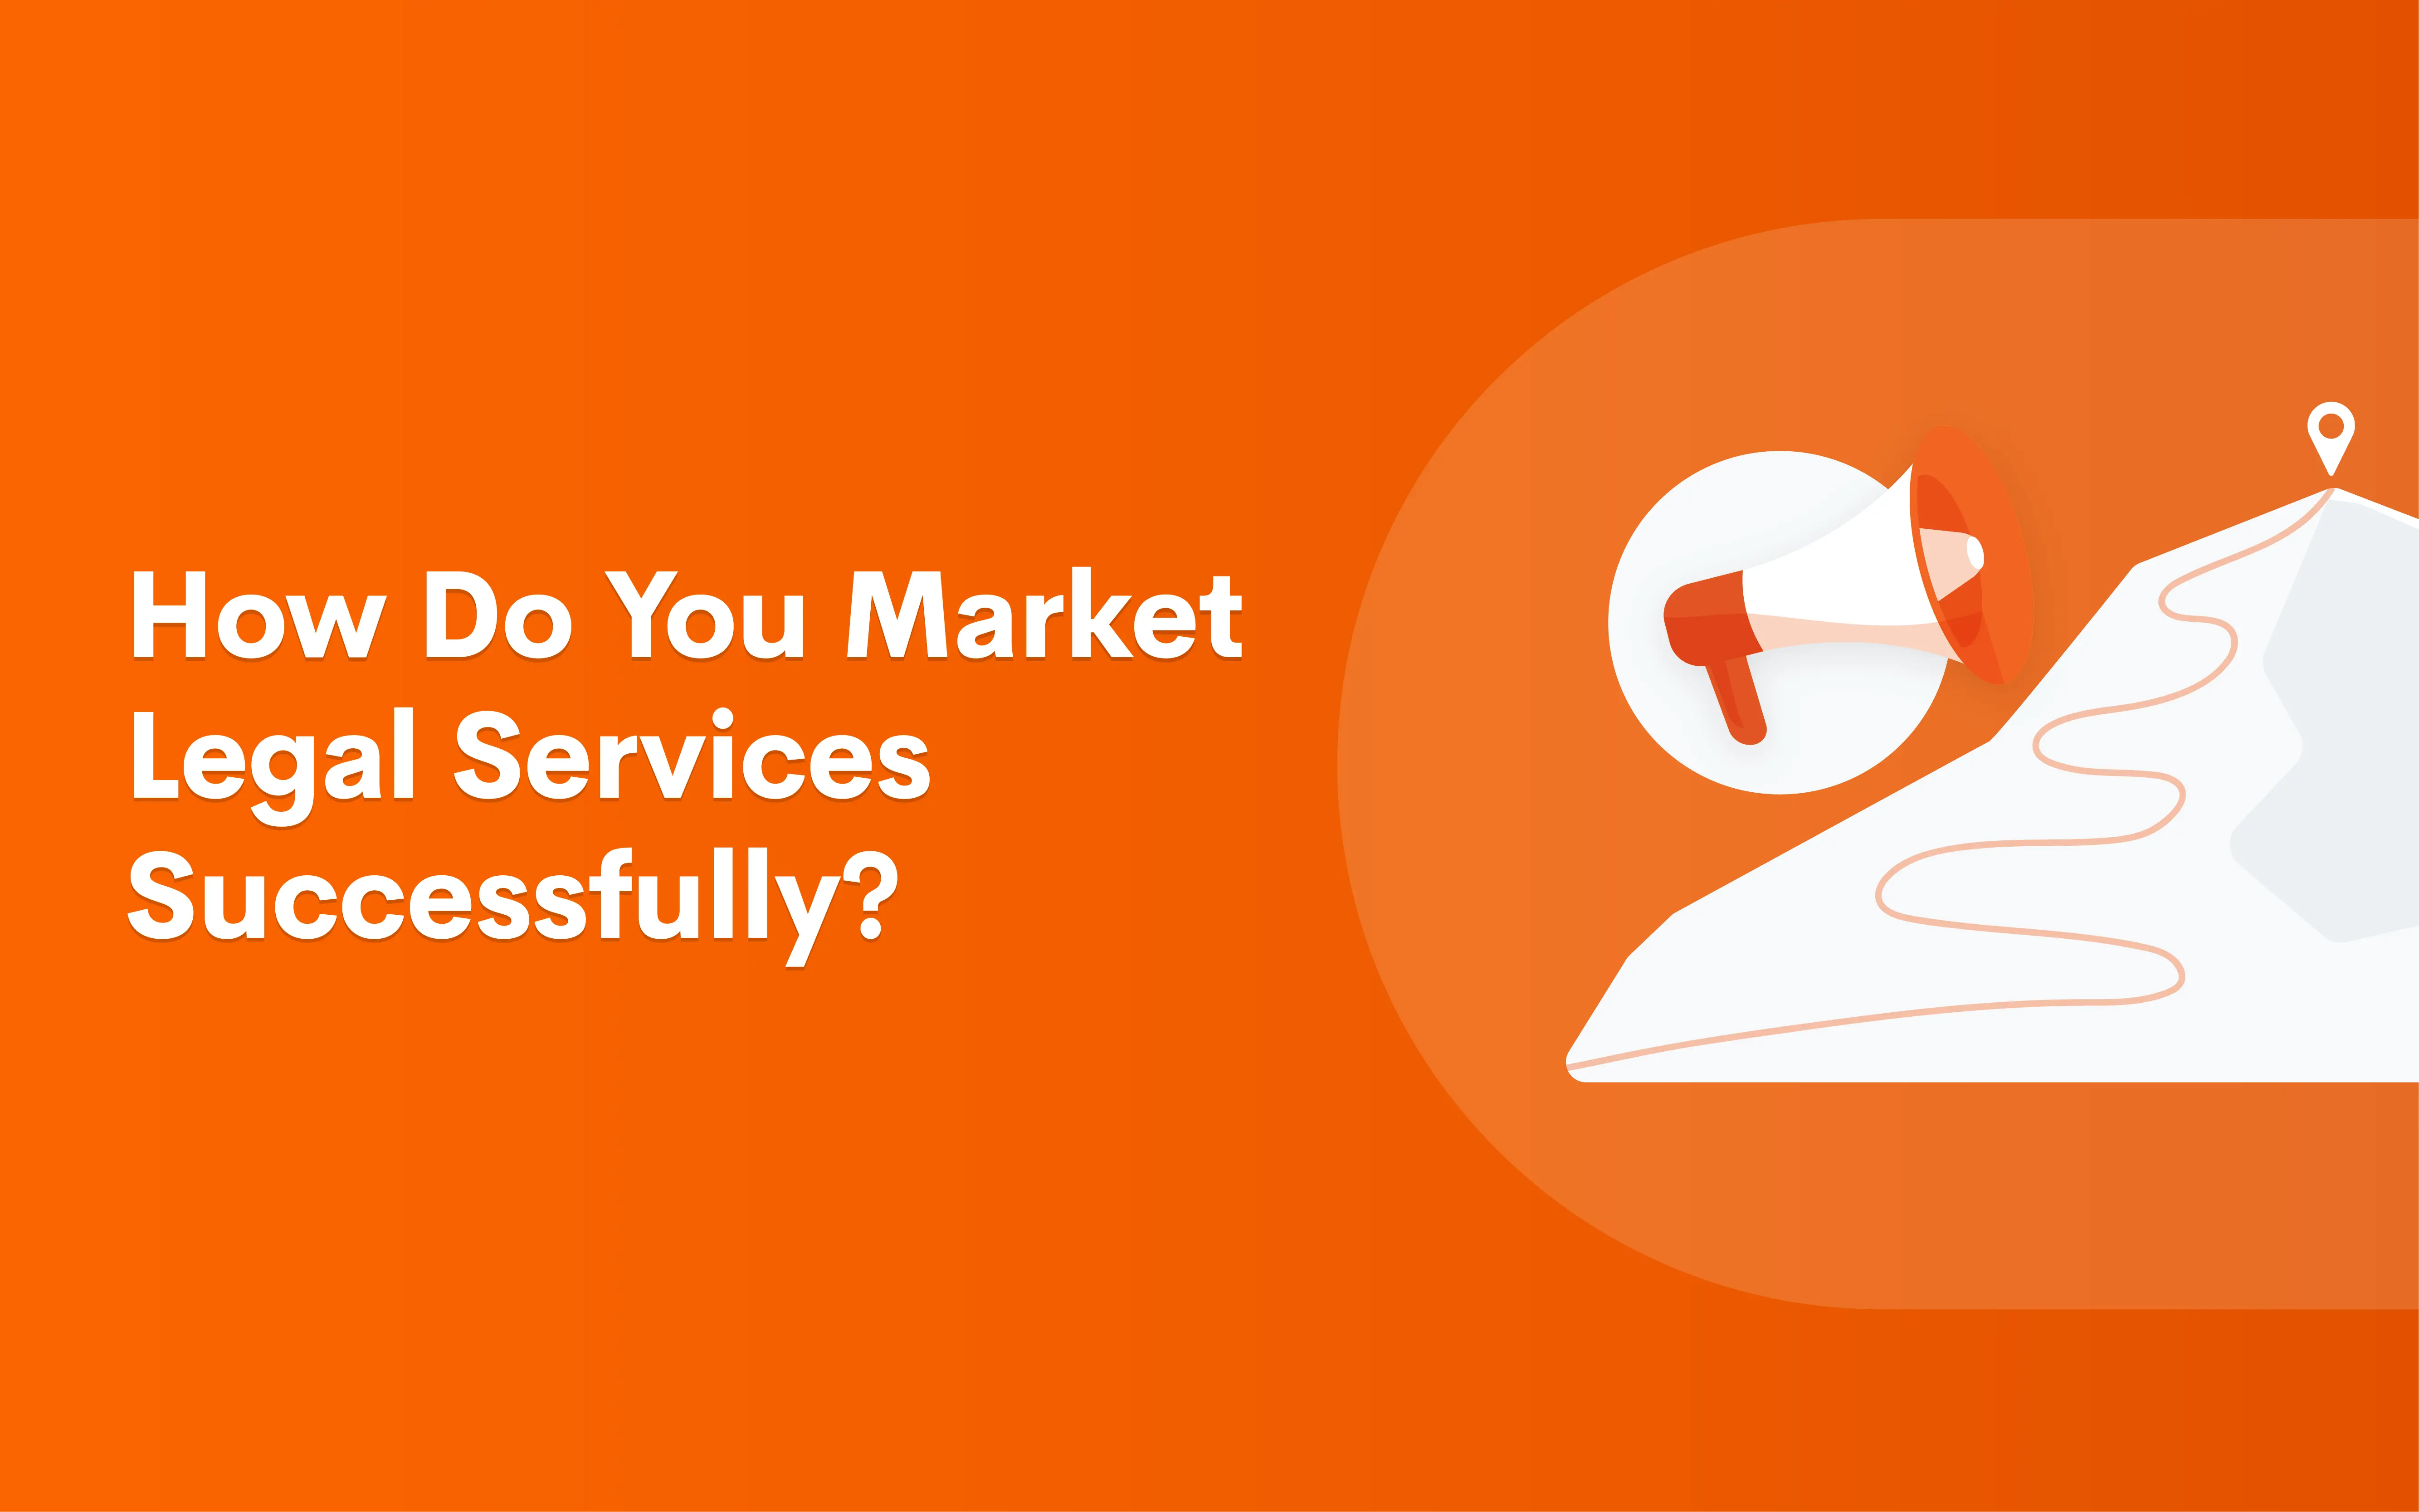 How Do You Market Legal Services Successfully?